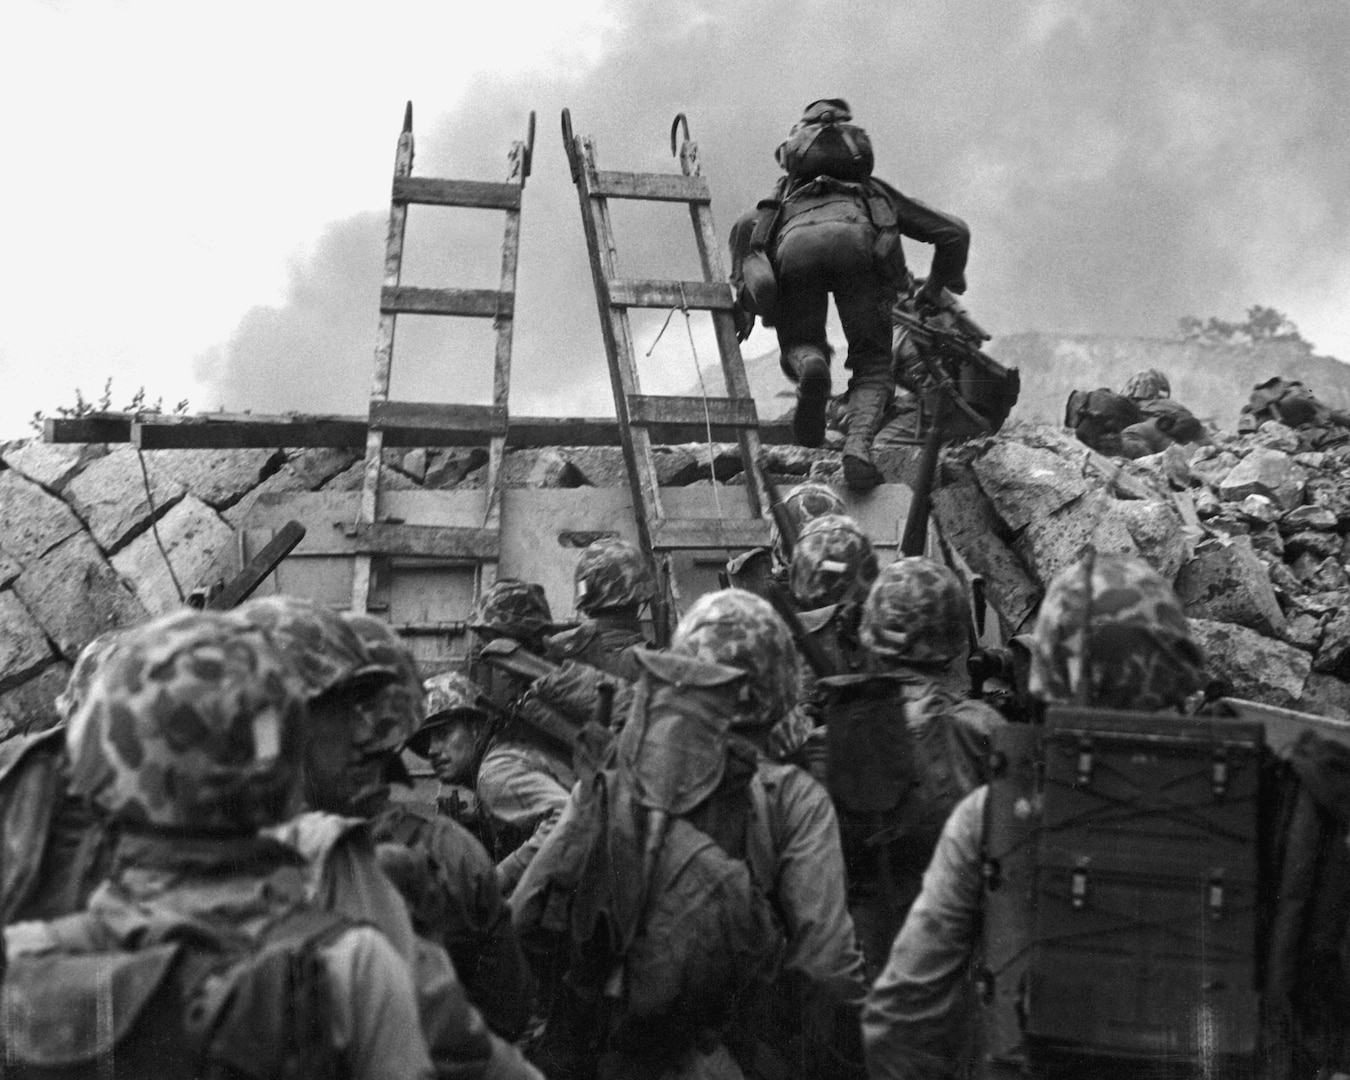 During Korean War, Marines use scaling ladders to storm ashore at Inchon in amphibious invasion on September 15, 1950 (U.S. Marine Corps/National Archives and Records Administration/W.W. Frank)